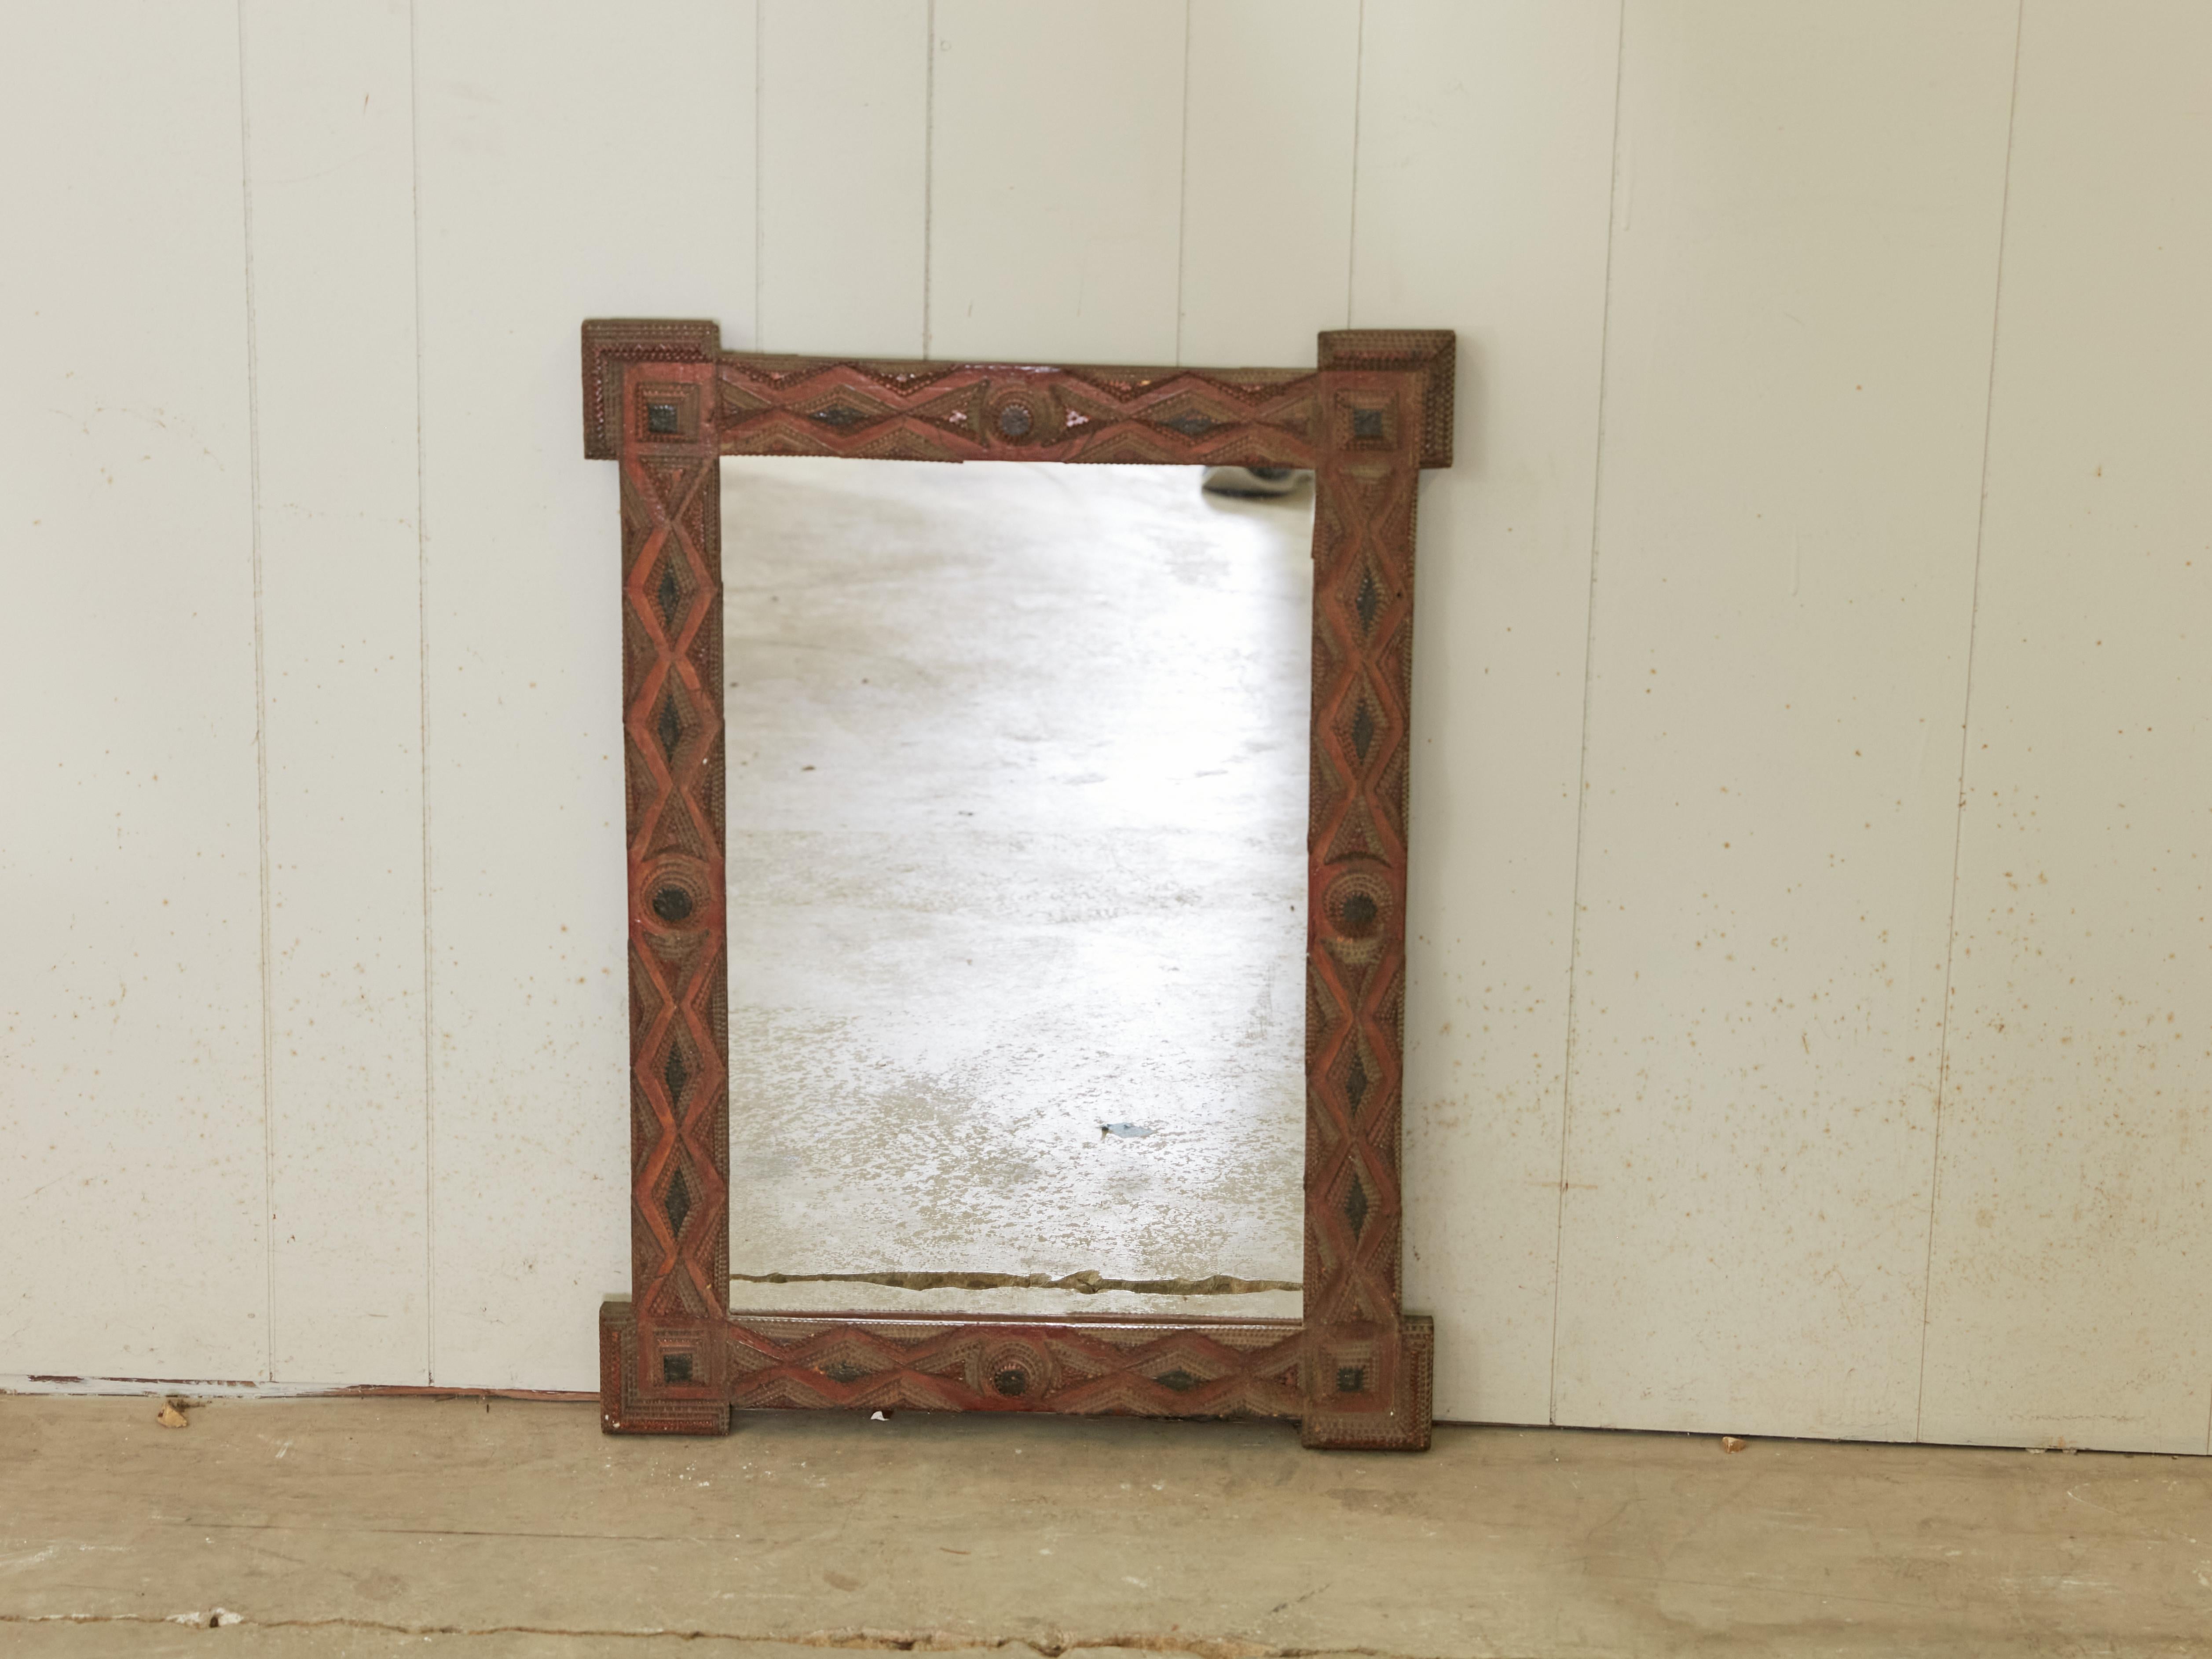 A French Turn of the century Tramp Art hand-carved mirror from the early 20th century, with protruding corners, raised geometric motifs and black and brown patina. Created in France during the Turn of the Century which saw the transition between the